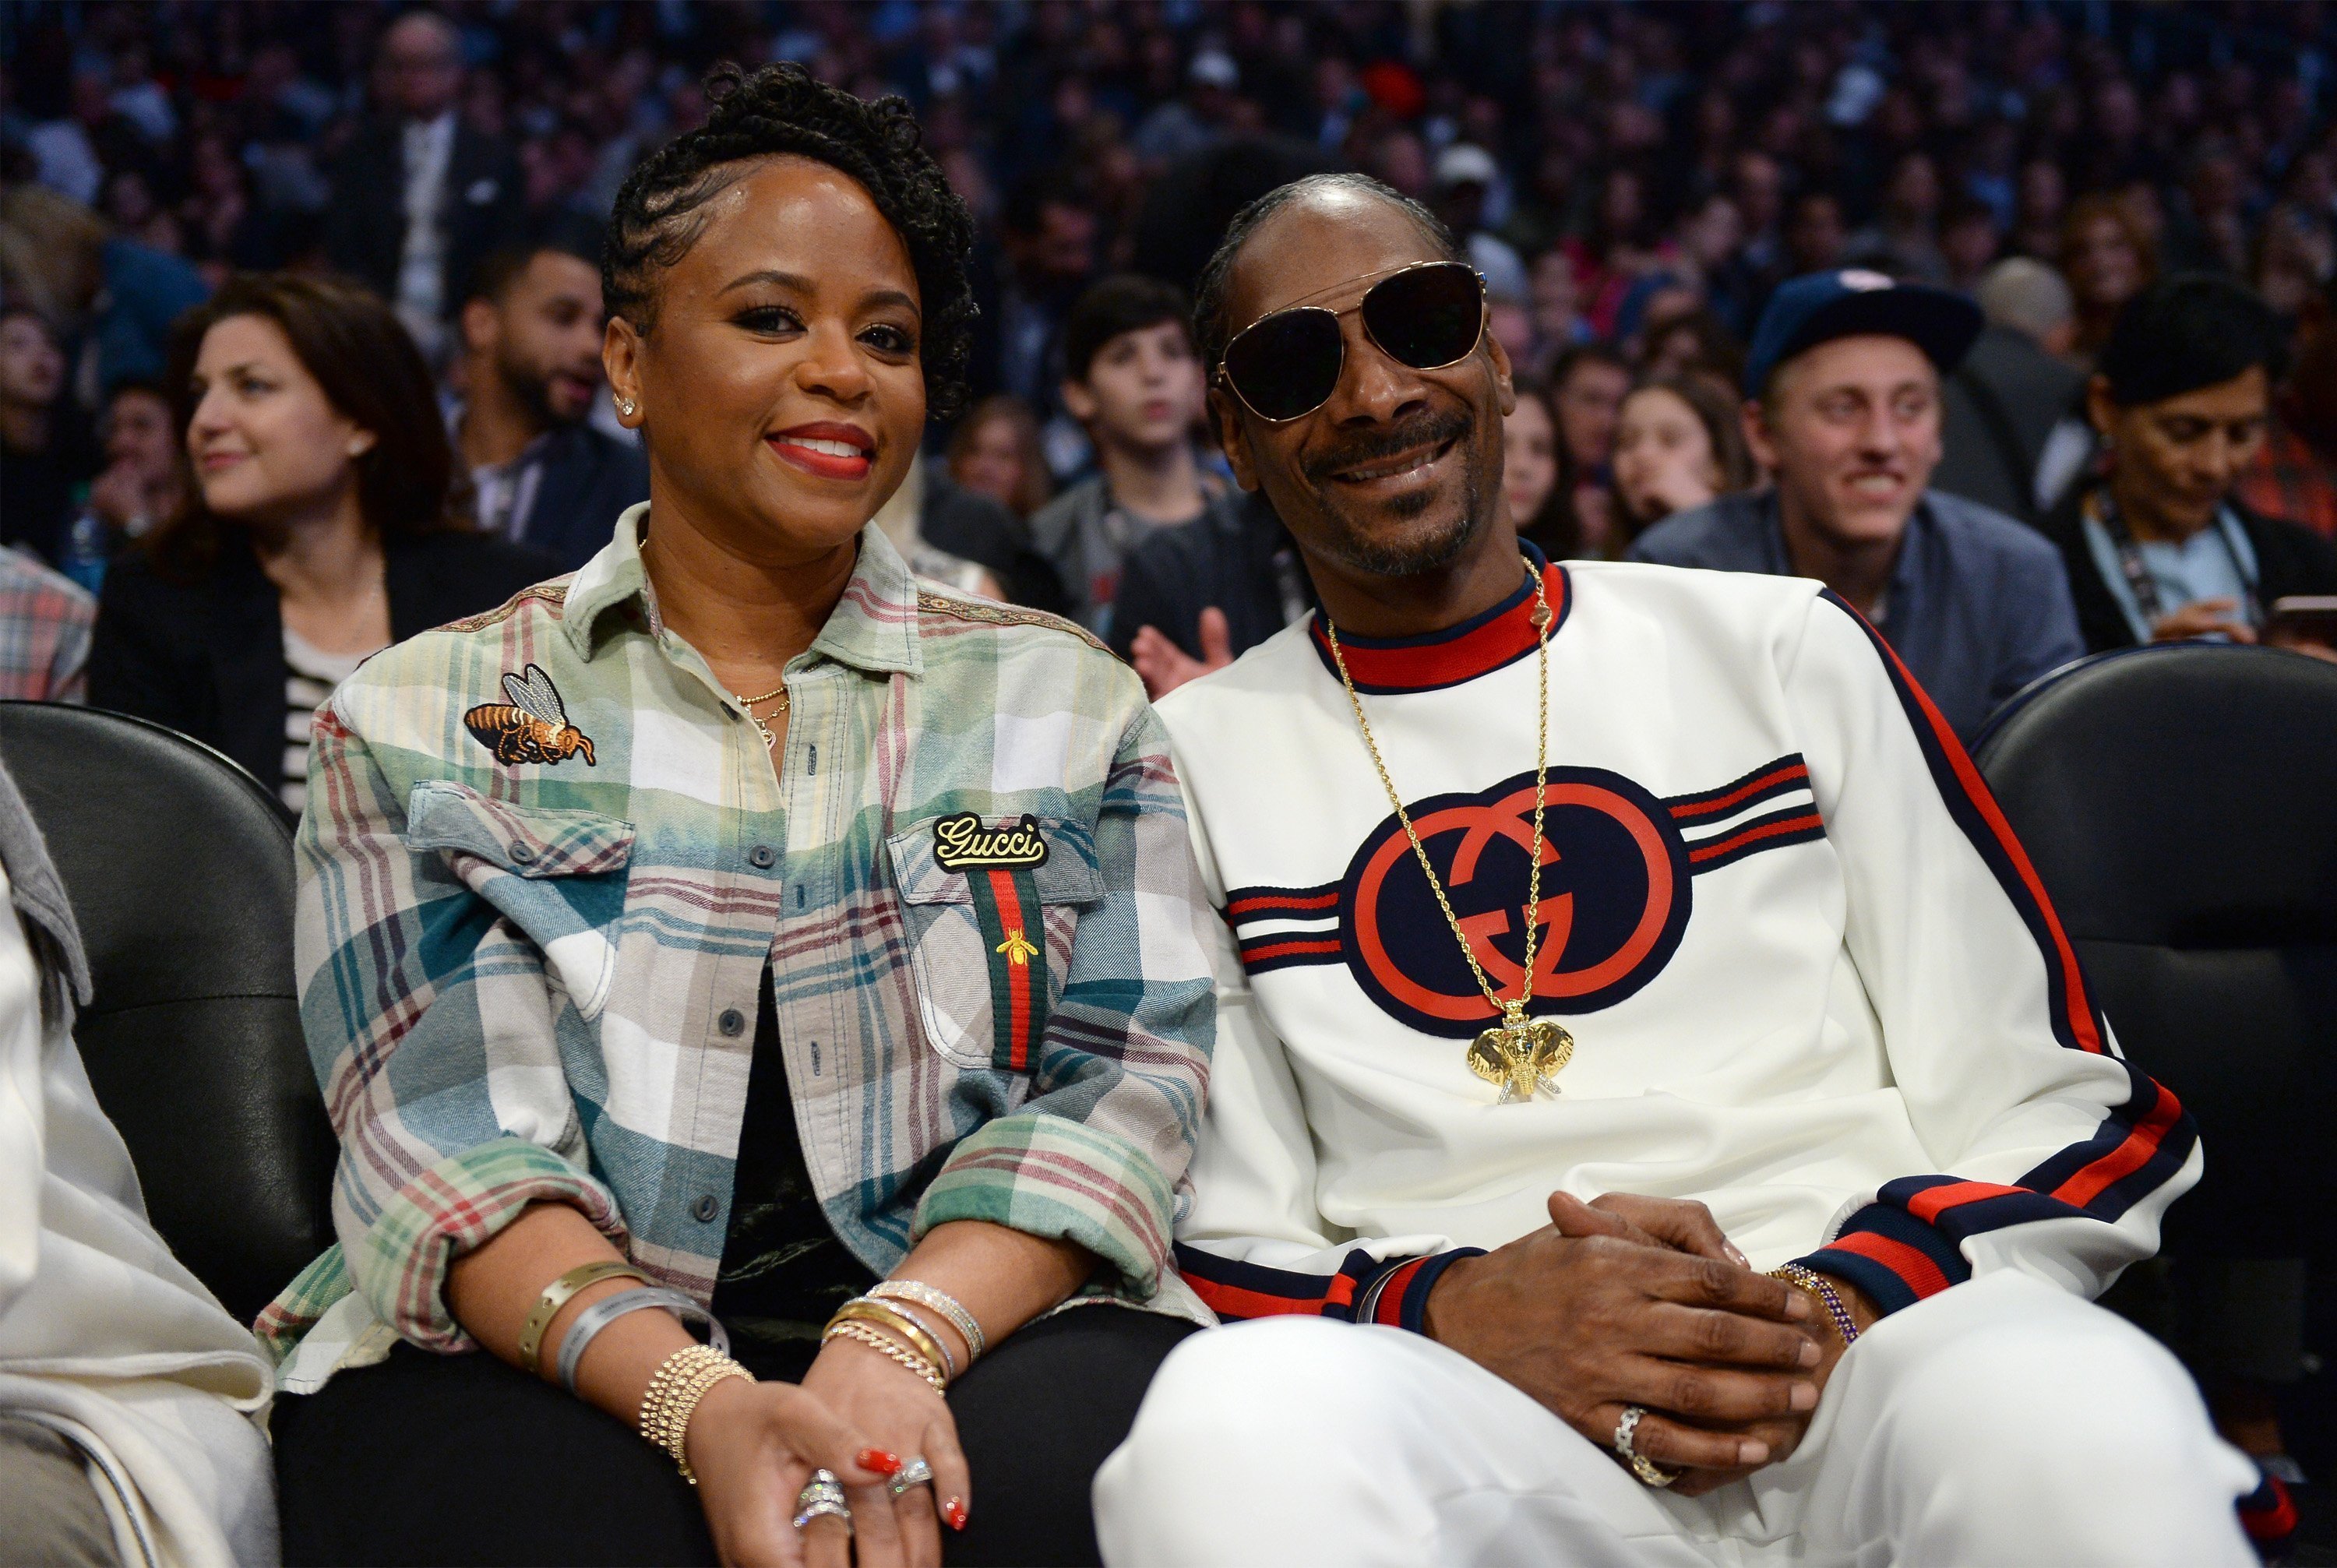 Snoop Dogg and wife Shante attend the NBA All-Star Game 2018 at Staples Center on February 18, 2018. | Photo: GettyImages